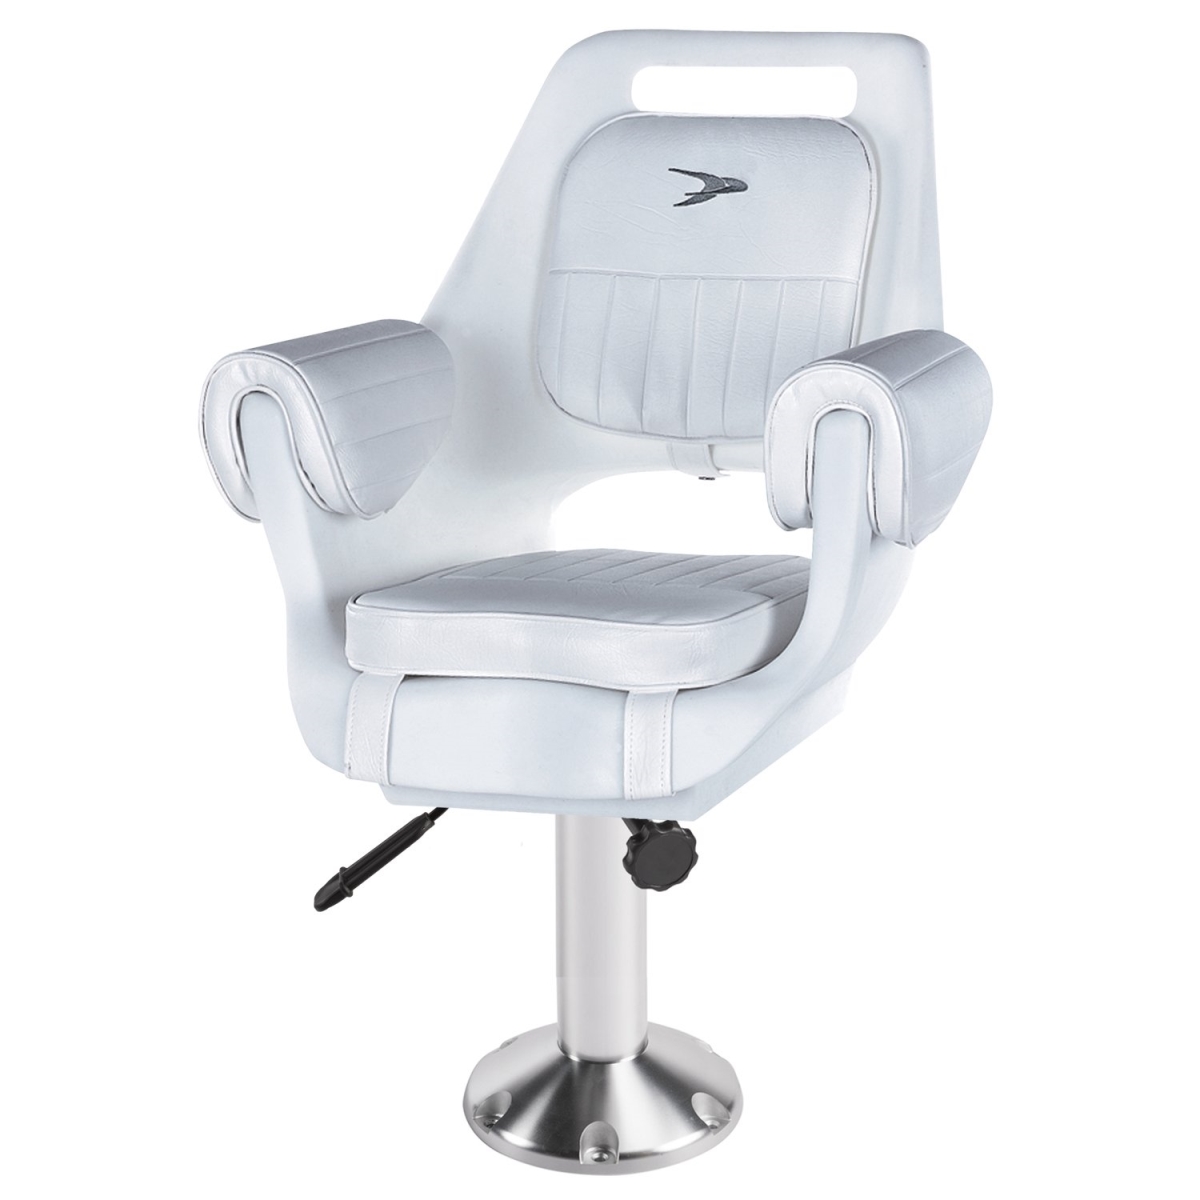 Wise 8WD007-710 Deluxe Pilot Chair with WP23-15-374 Ped, White